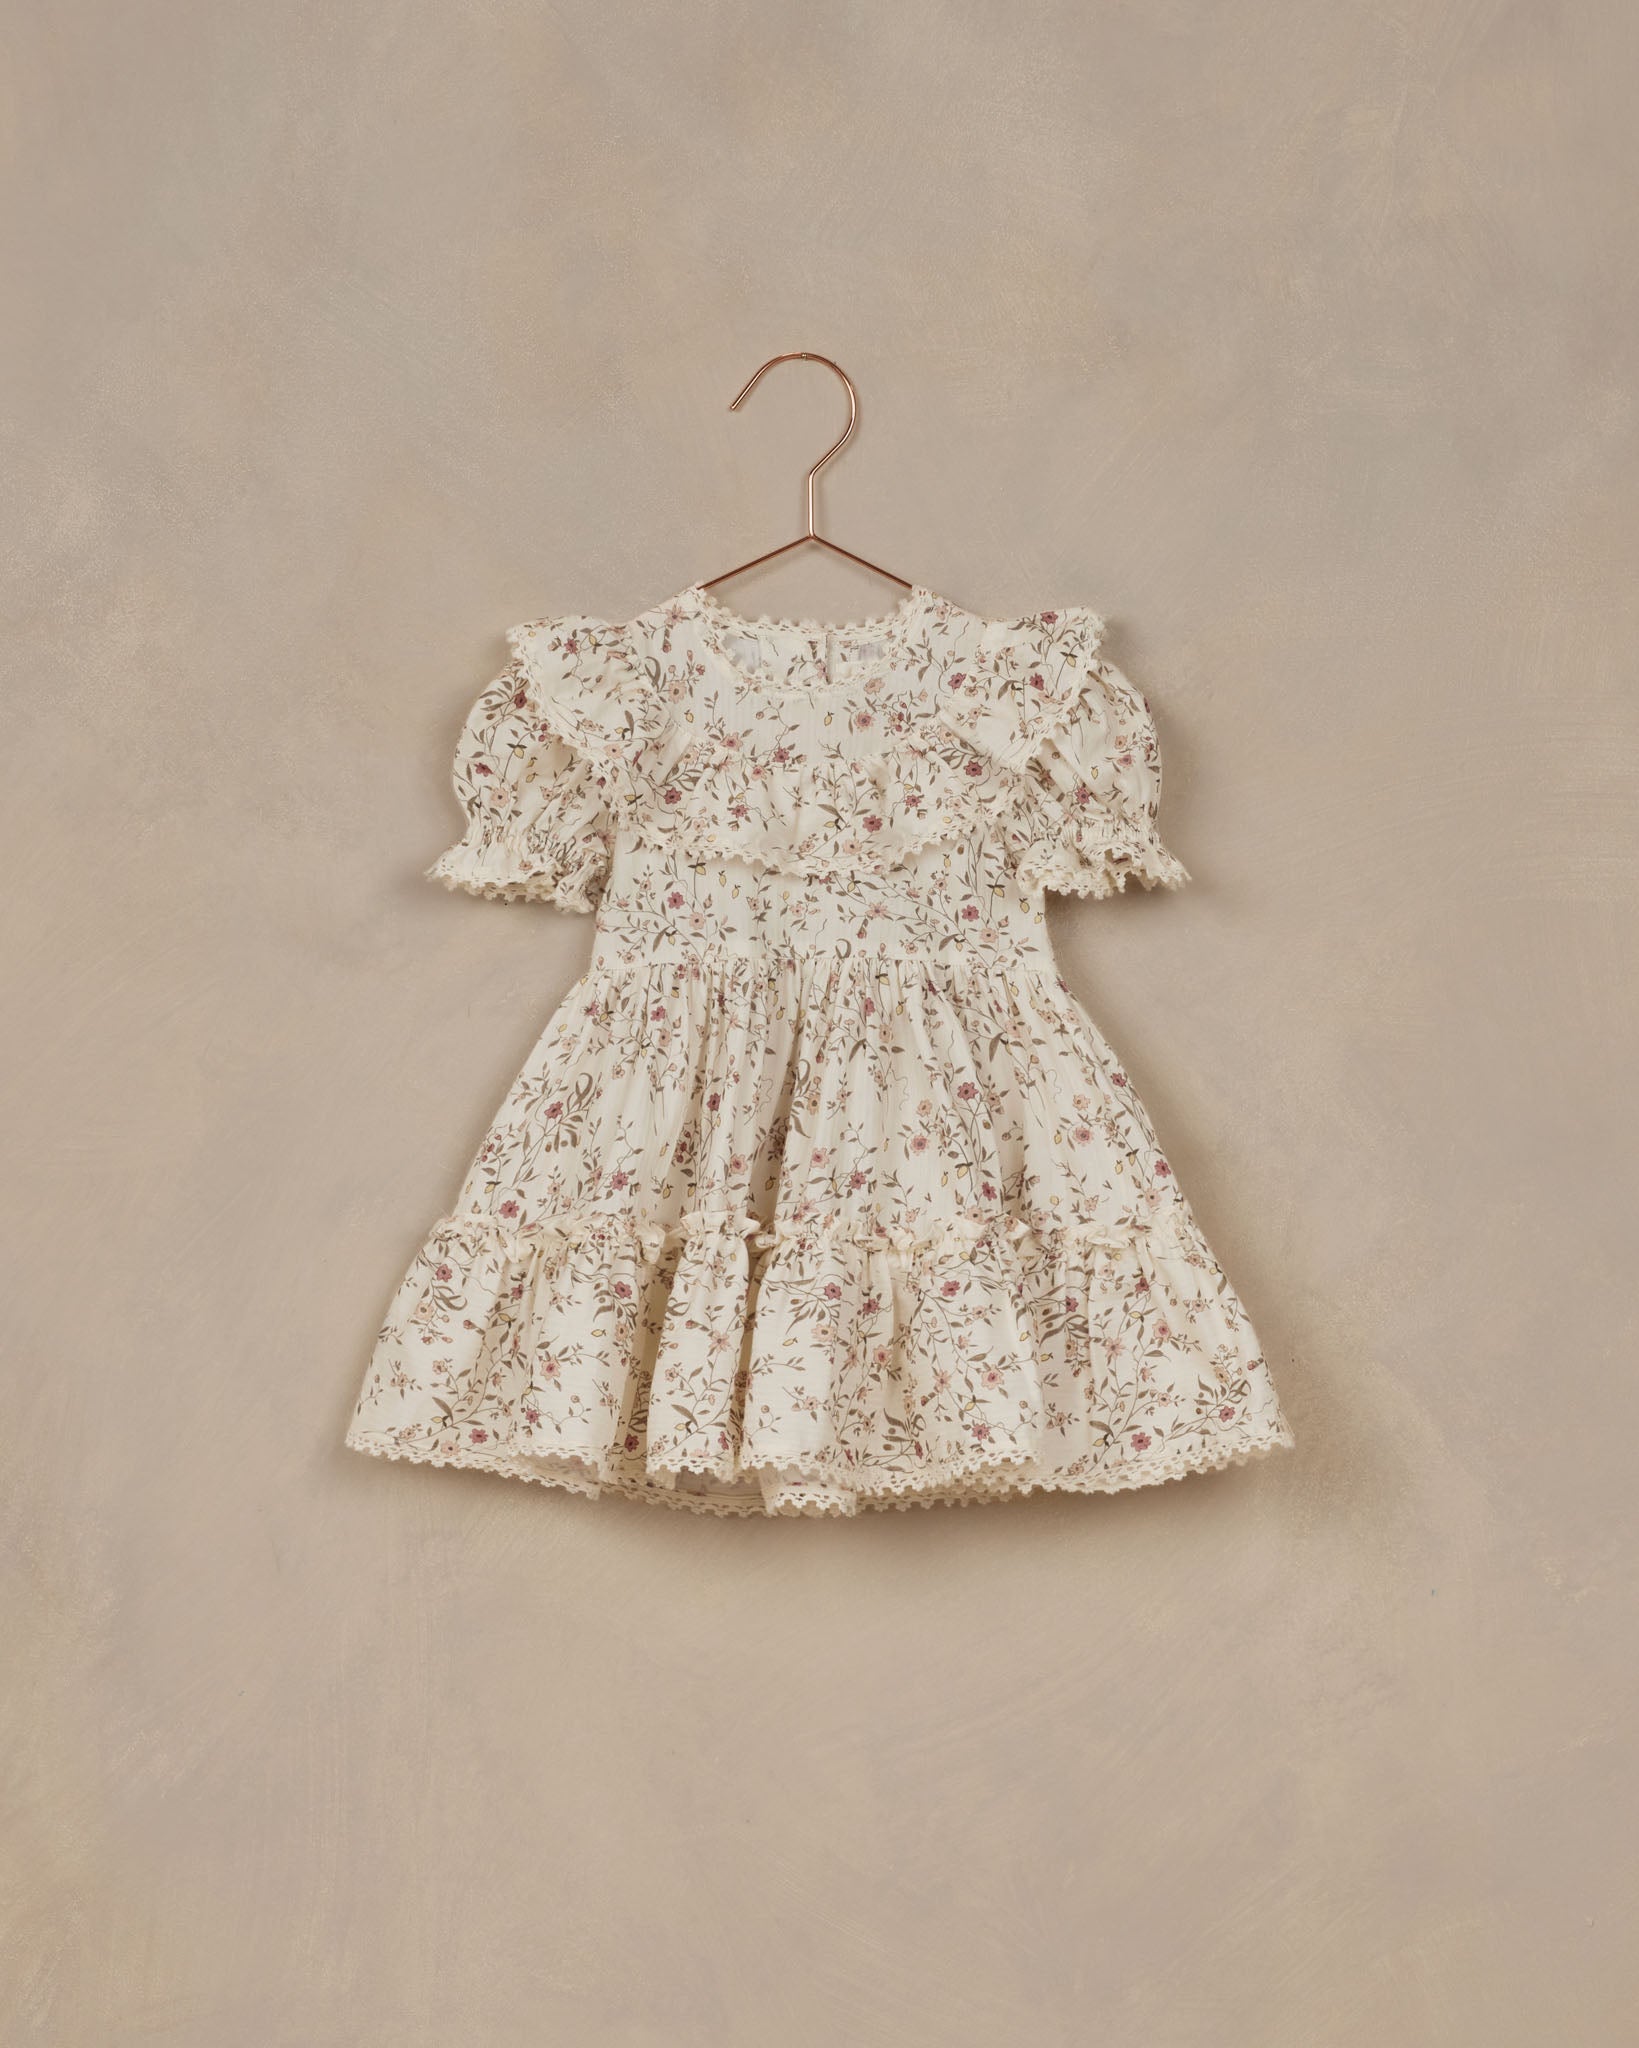 Eva Dress || Garden - Rylee + Cru | Kids Clothes | Trendy Baby Clothes | Modern Infant Outfits |